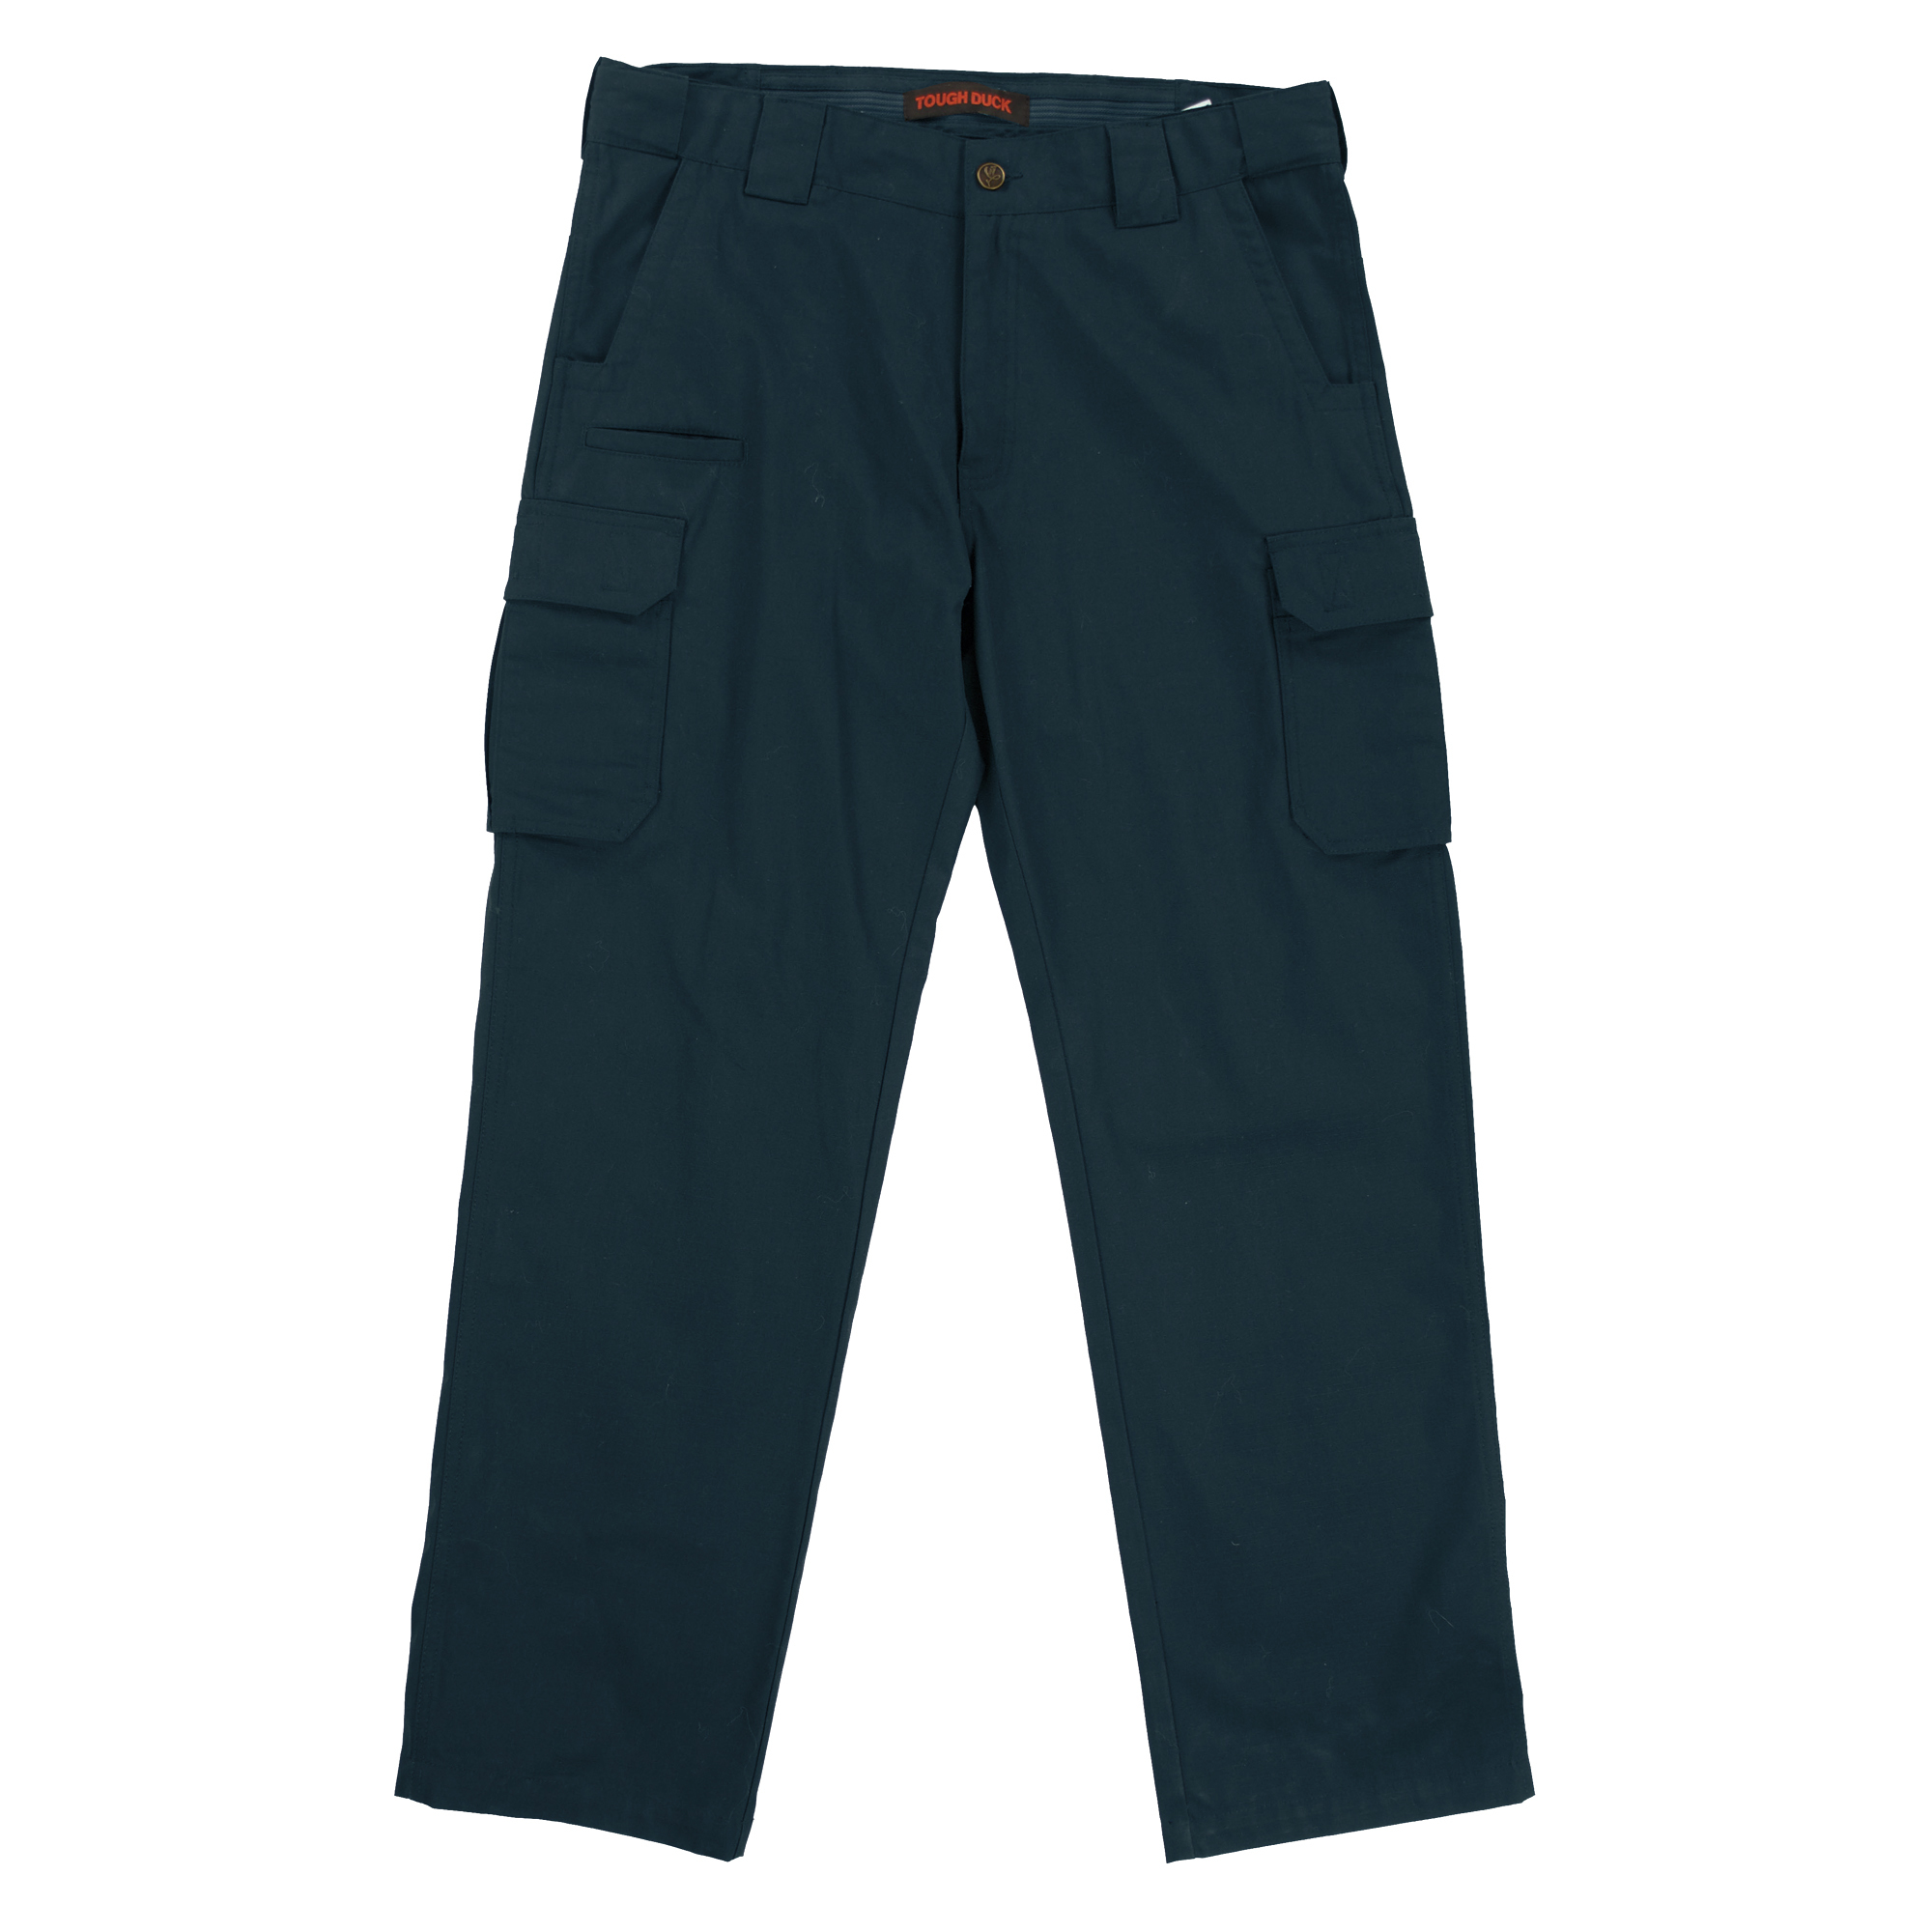 Tough Duck, Ripstop Cargo Pant, Waist 40 in, Inseam 34 in, Color Navy, Model WP113